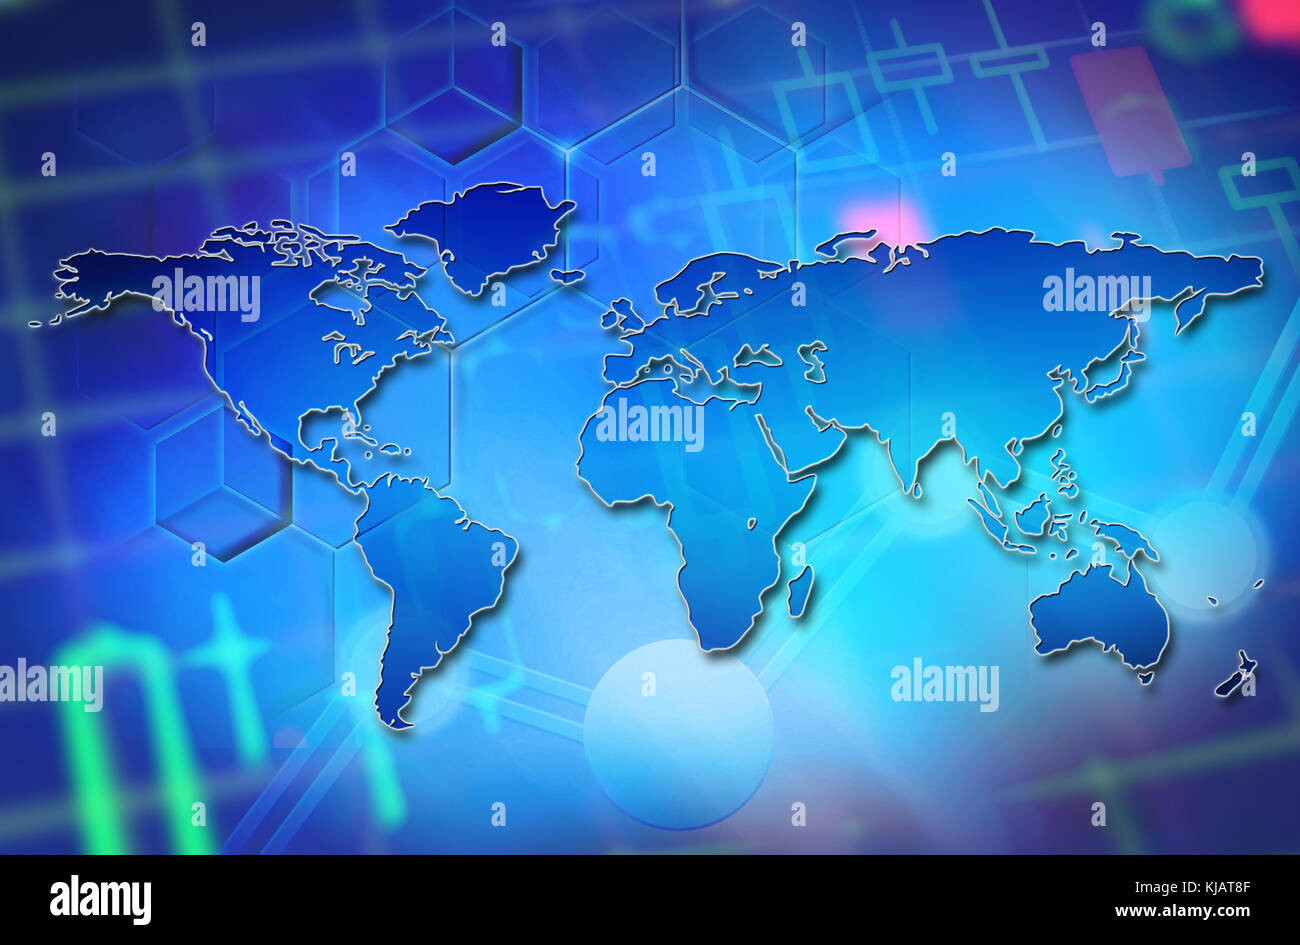 Economy, business, financial background. Economy concept wallpaper, global  map at background of stock market chart and data. Blue background for news  Stock Photo - Alamy